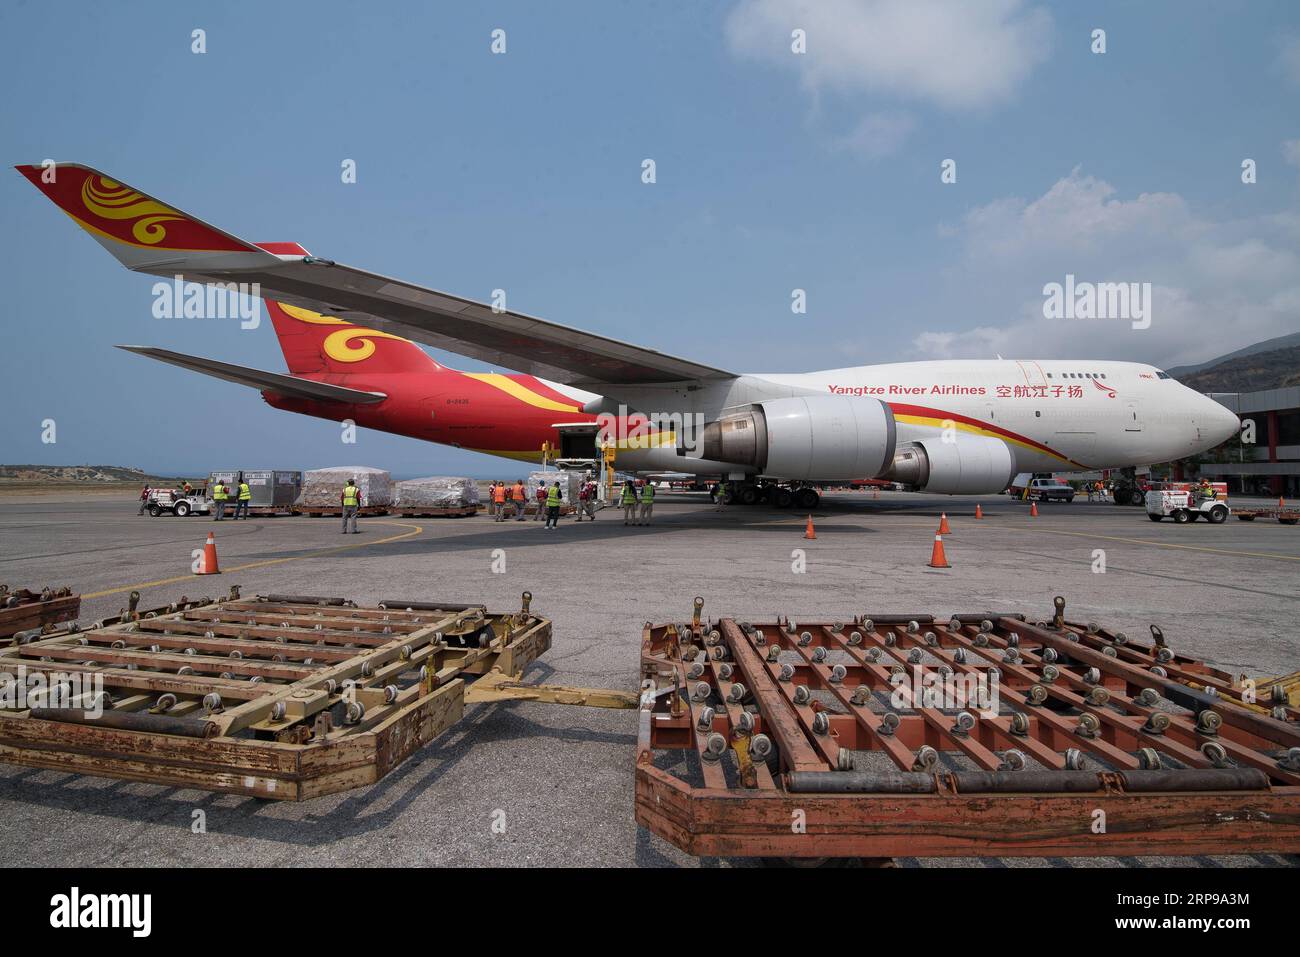 (190330) -- CARACAS, March 30, 2019 -- The plane loaded with Chinese aids is seen at the Simon Bolivar International Airport in Maiquetia in the state of Vargas, Venezuela, on March 29, 2019. The Venezuelan government received on Friday medical aid from China. ) VENEZUELA-CARACAS-CHINA-MEDICAL AID MarcosxSalgado PUBLICATIONxNOTxINxCHN Stock Photo